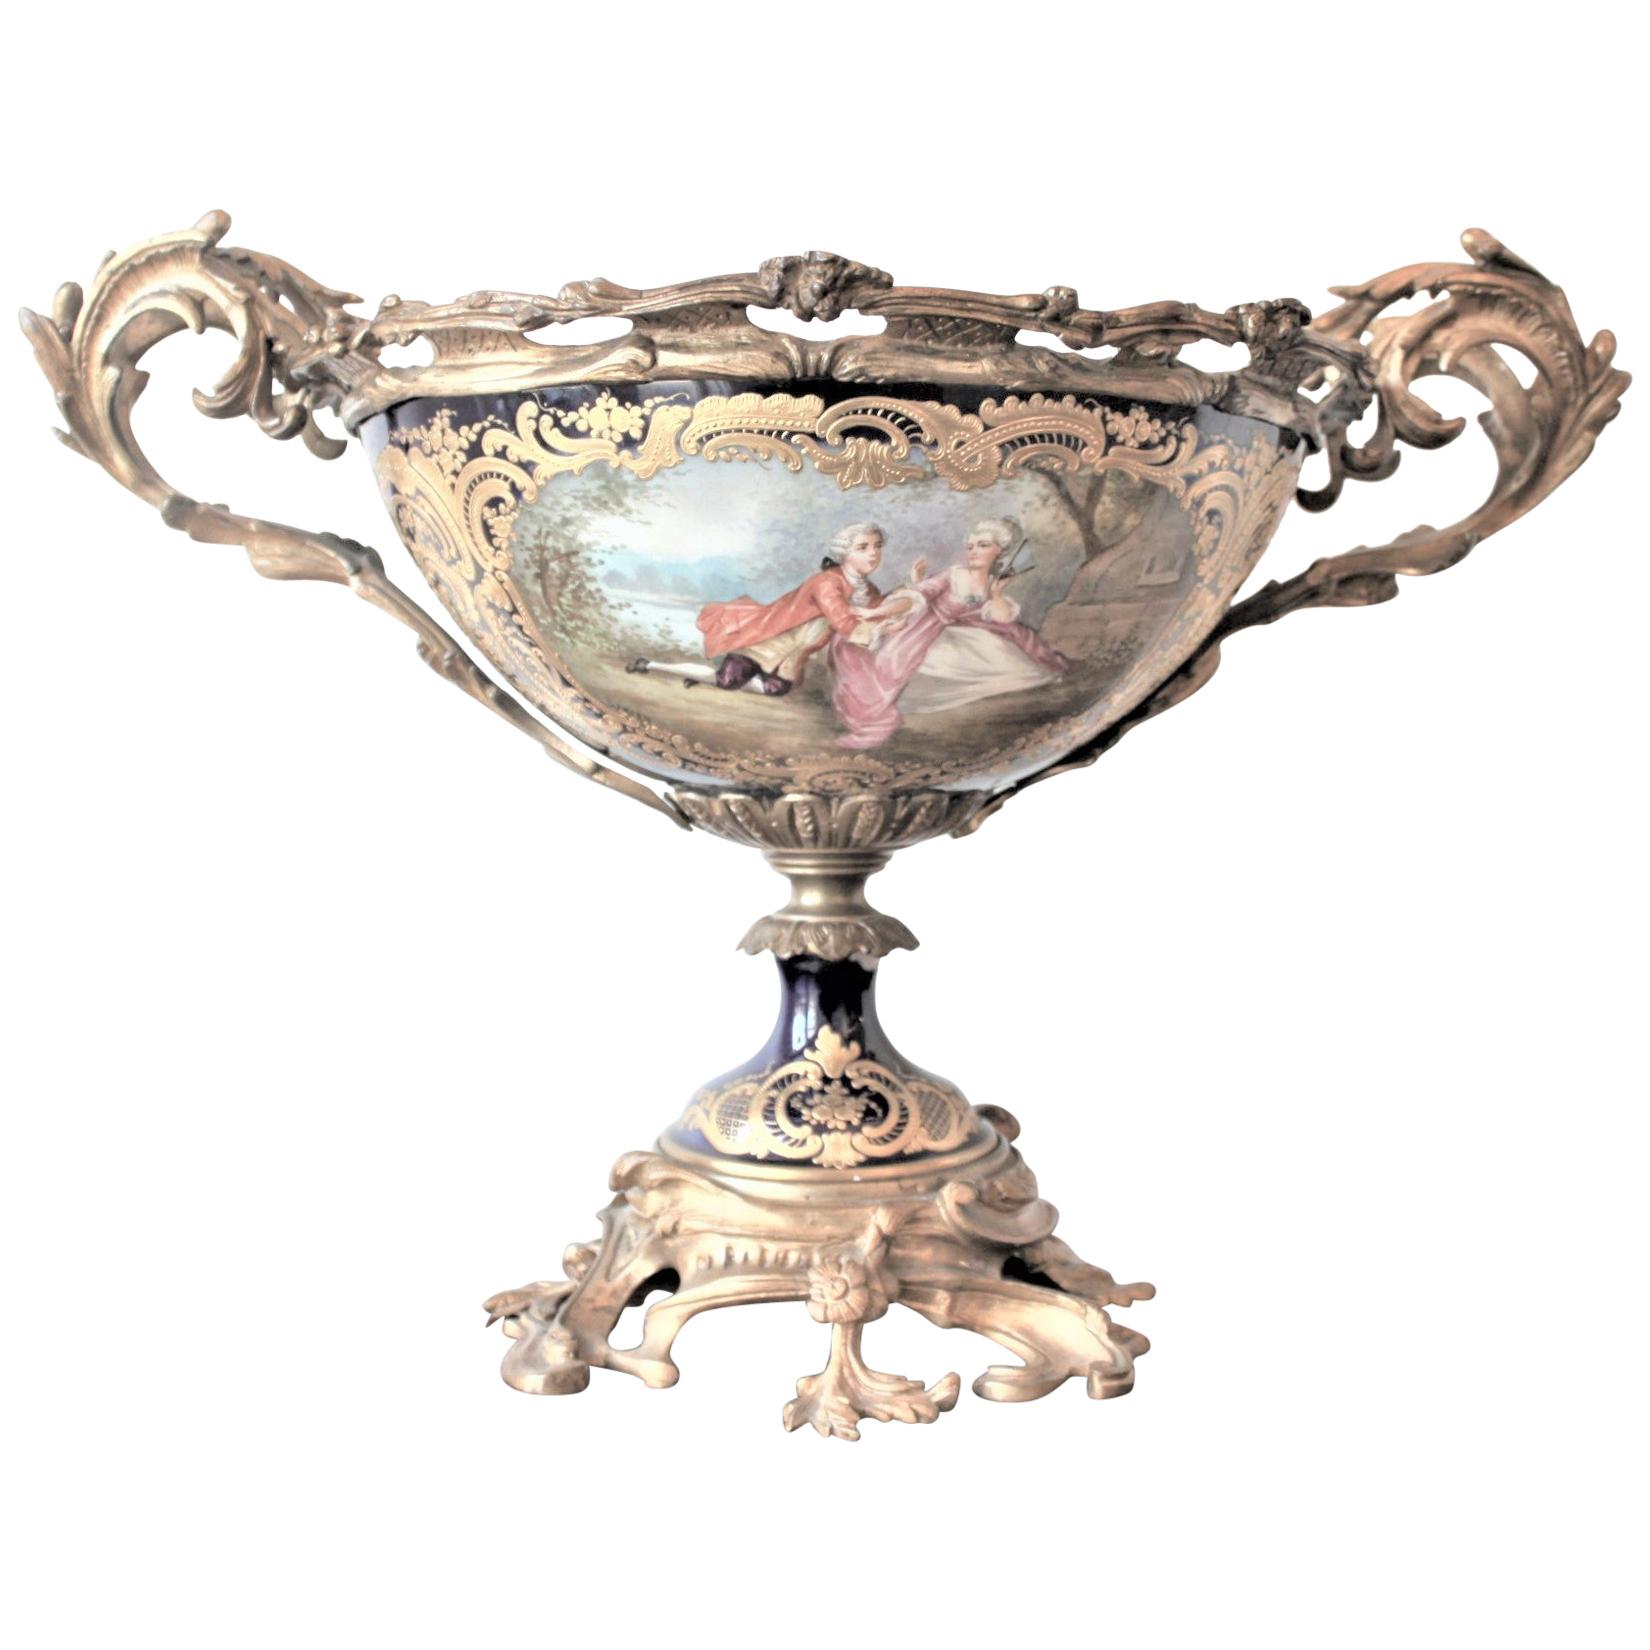 Antique Sevres Ormolu-Mounted and Hand Painted Porcelain Centerpiece or Compote